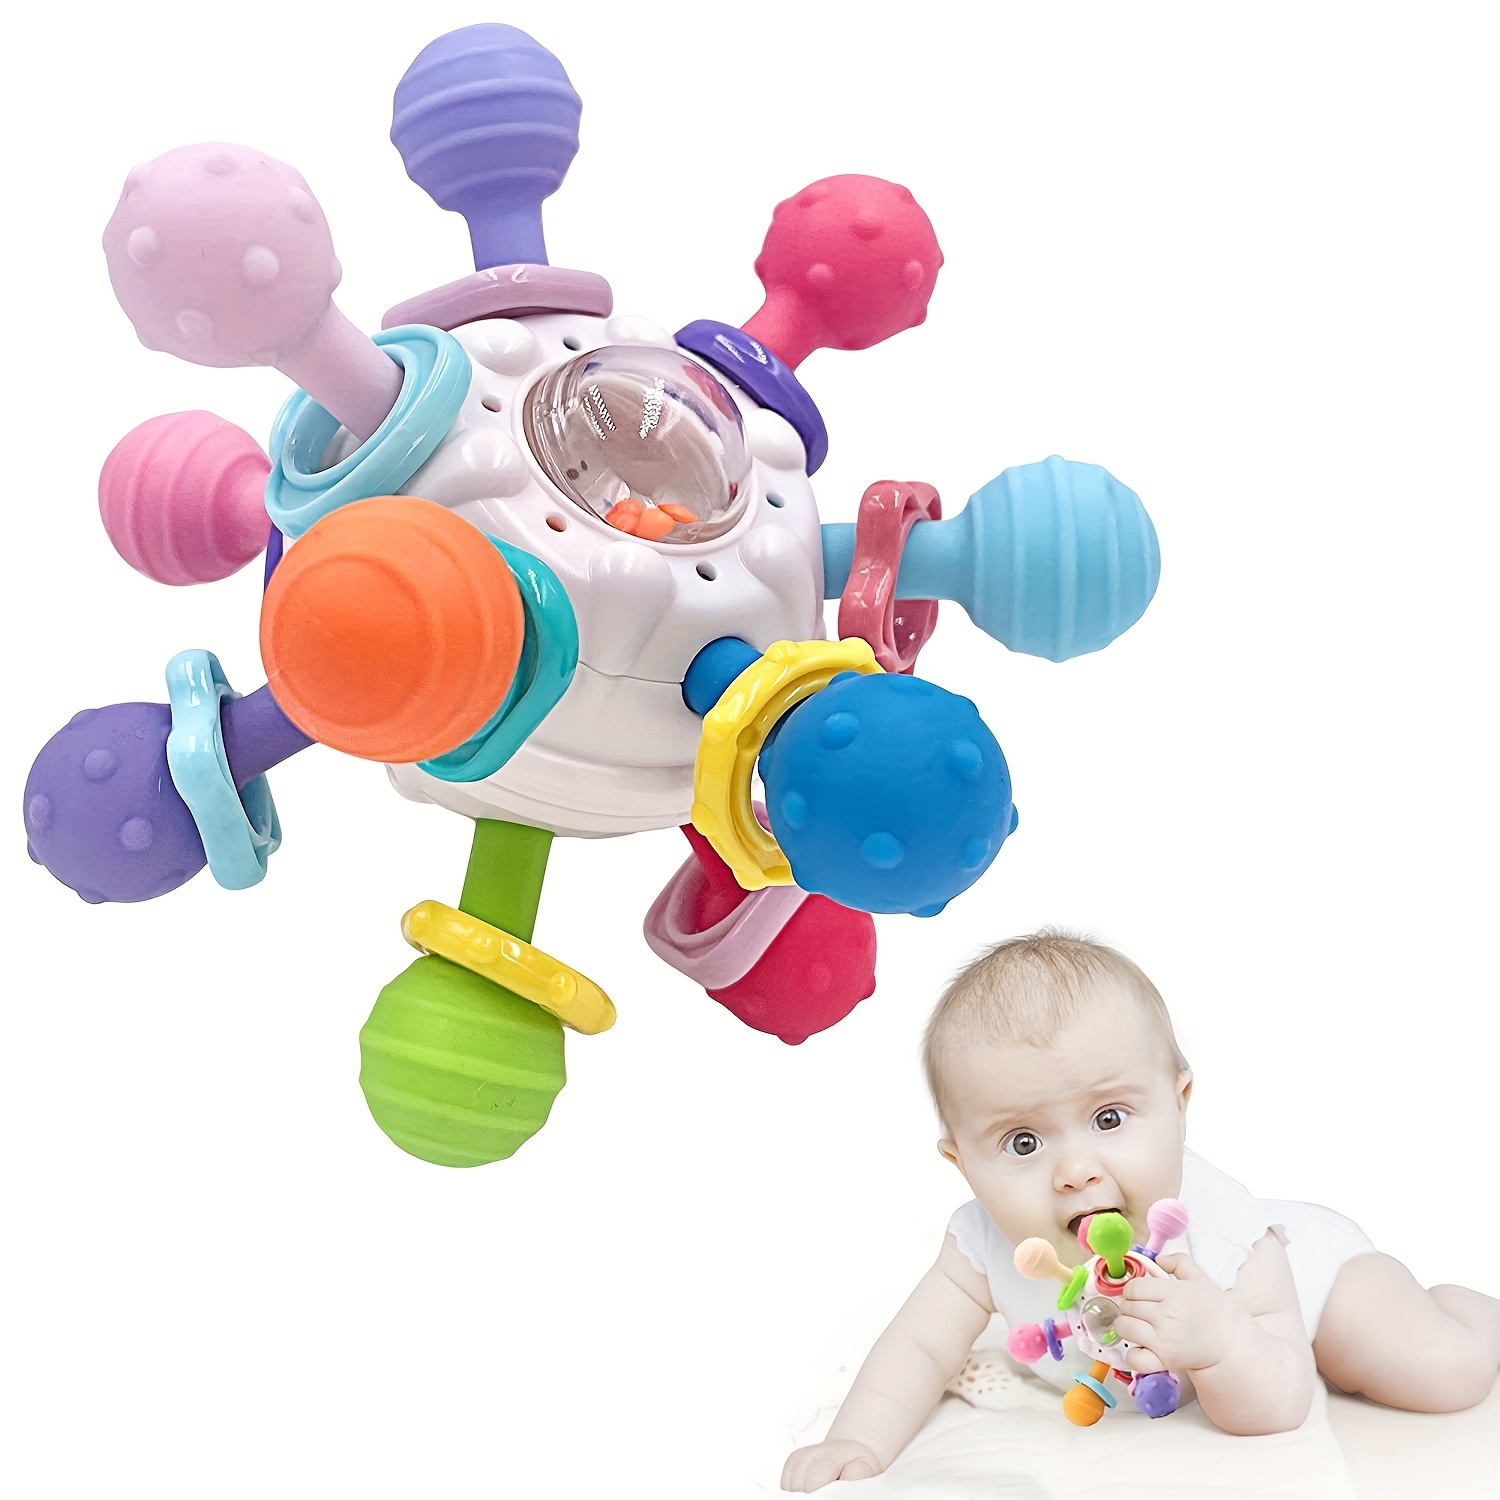 

Baby Montessori Toy Baby Teething Teether Toys 6 To 12 Months: Teether Toys For Baby 6-12 Months | Baby Toys 0 To 6 Months Baby Teething Ball Toy 0-3 Month Rattle Infant Toys For 0-3-6-12 Months Baby,